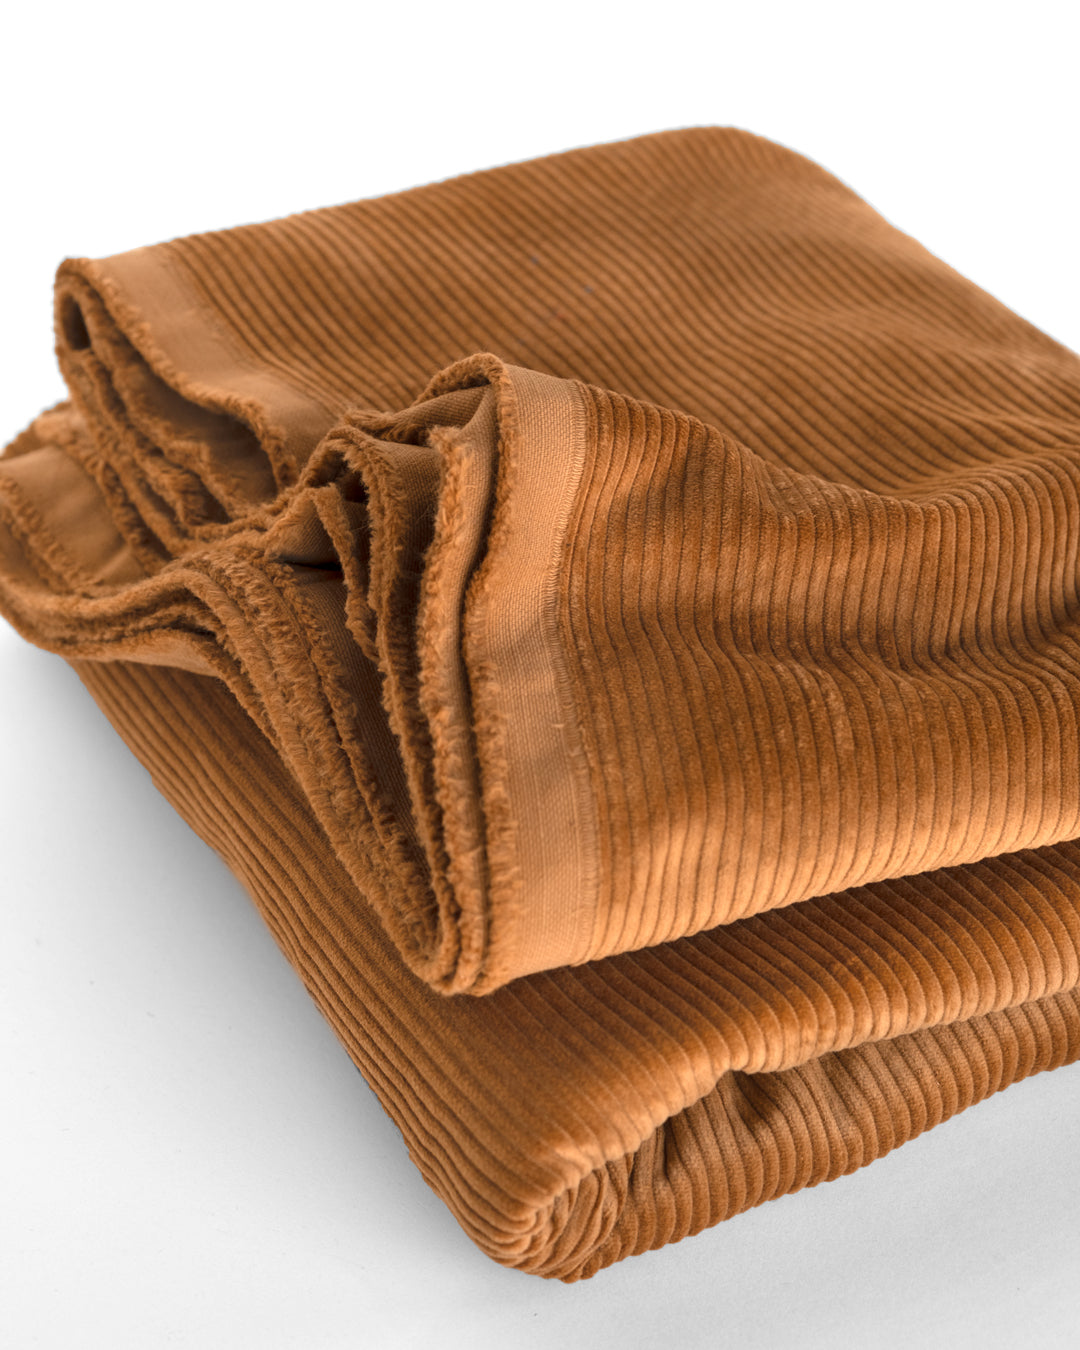 Chunky wide wale corduroy in Caramel brown, 100% natural cotton fiber